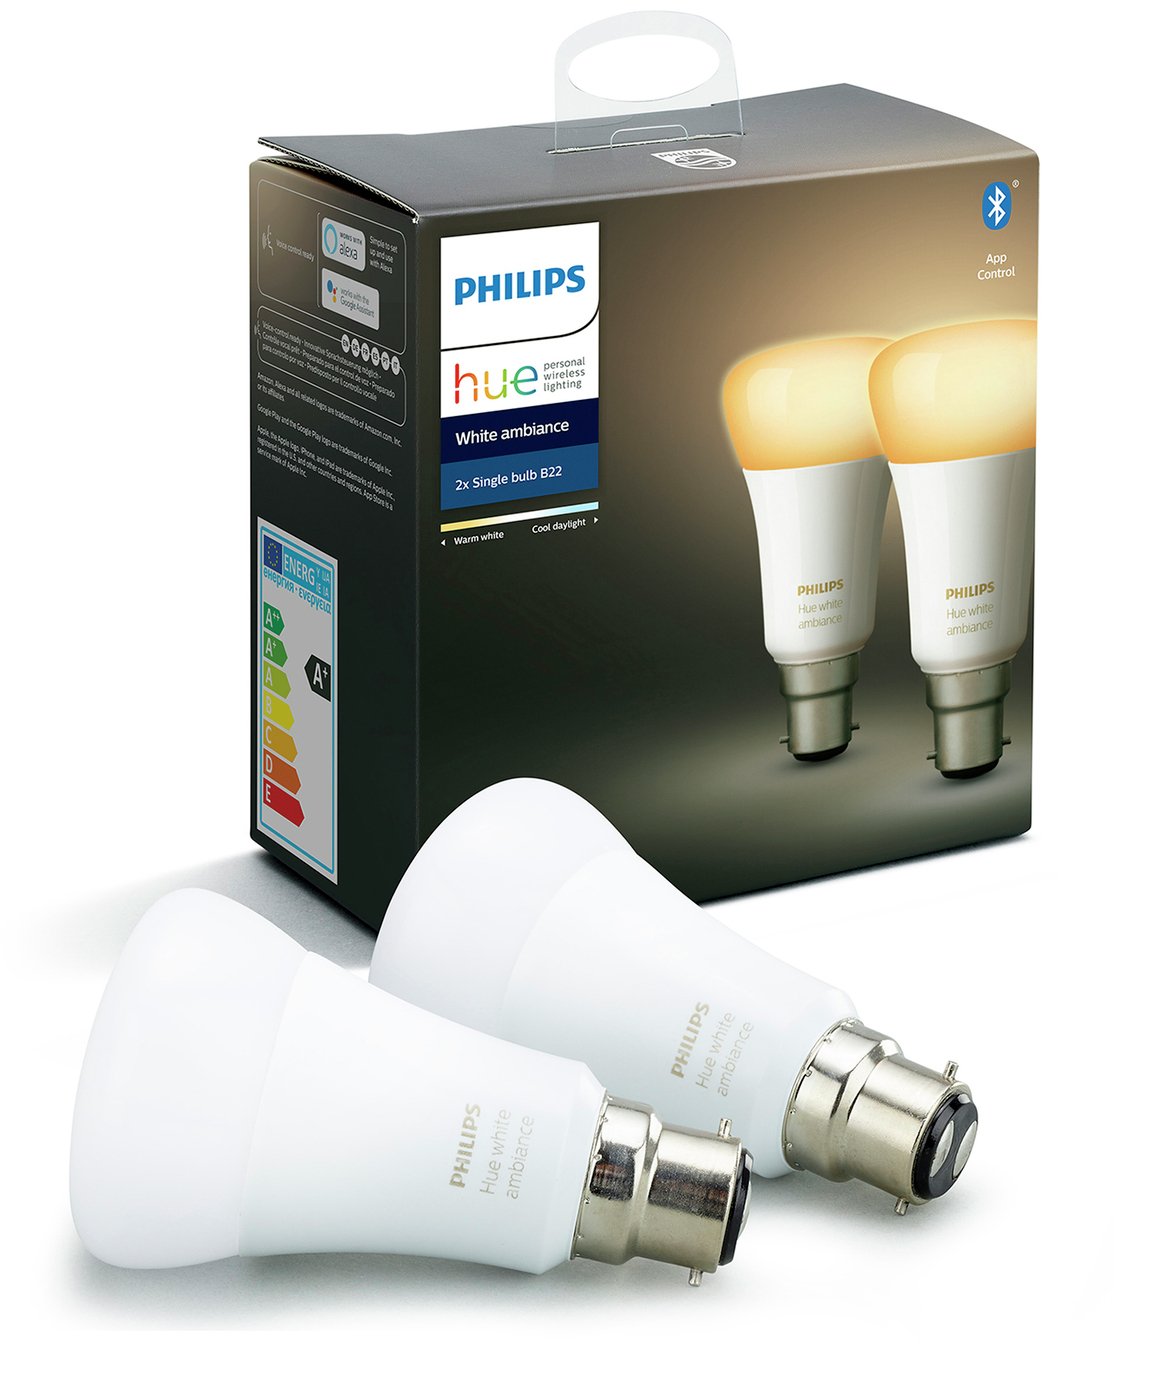 Philips Hue B22 White Smart Bulbs with Bluetooth Review